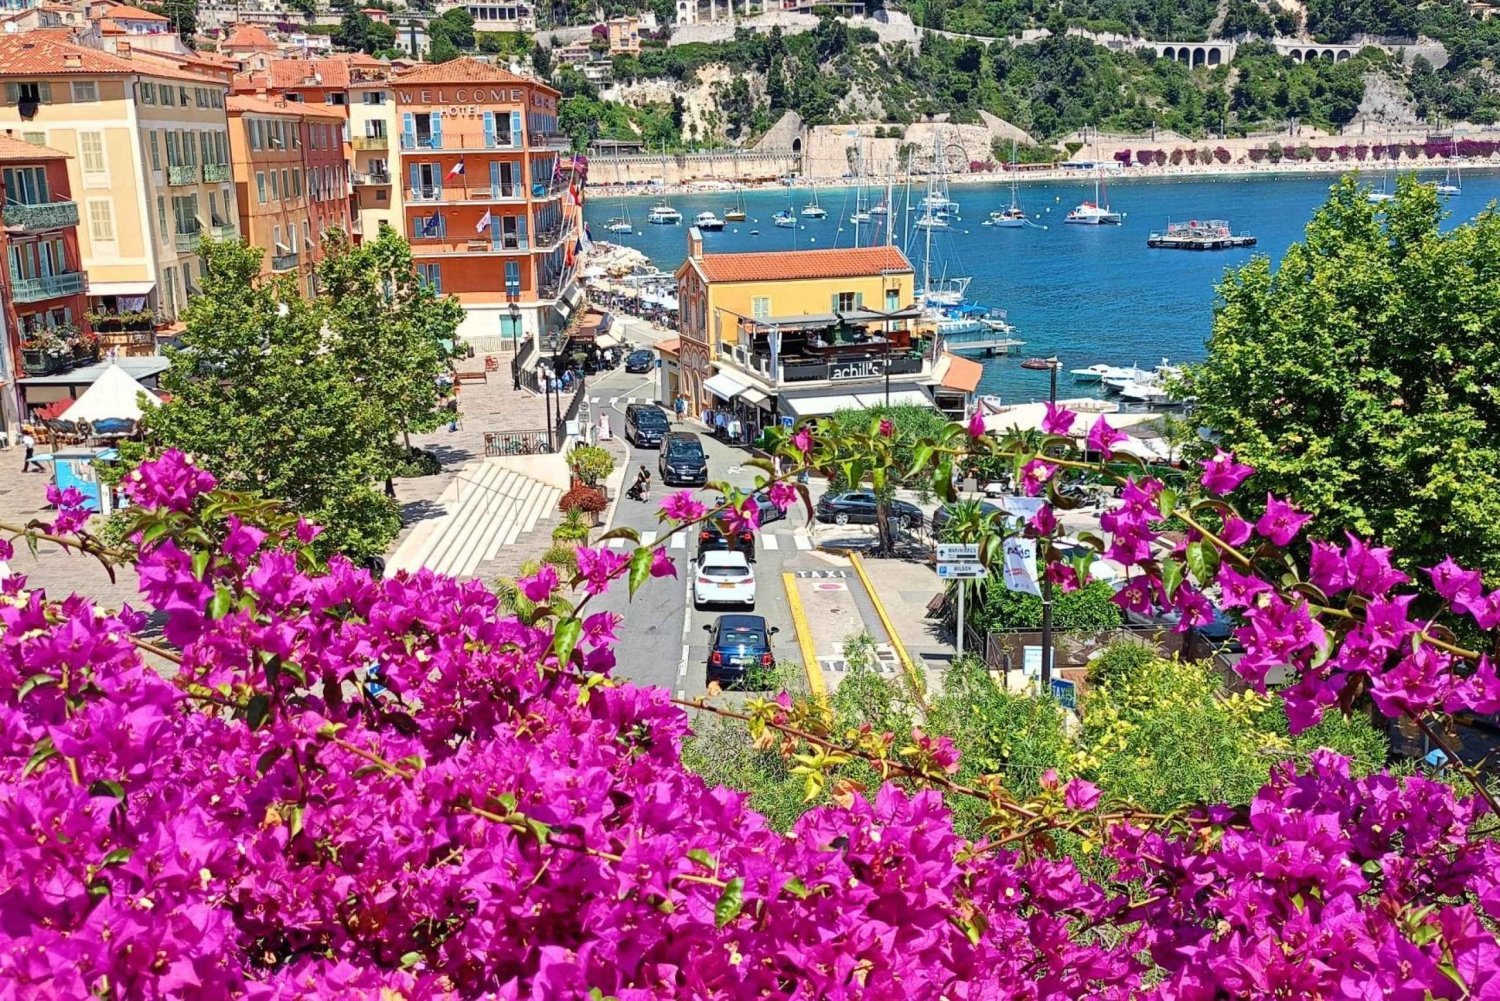 The Coastal Path hike from Nice to Villefranche